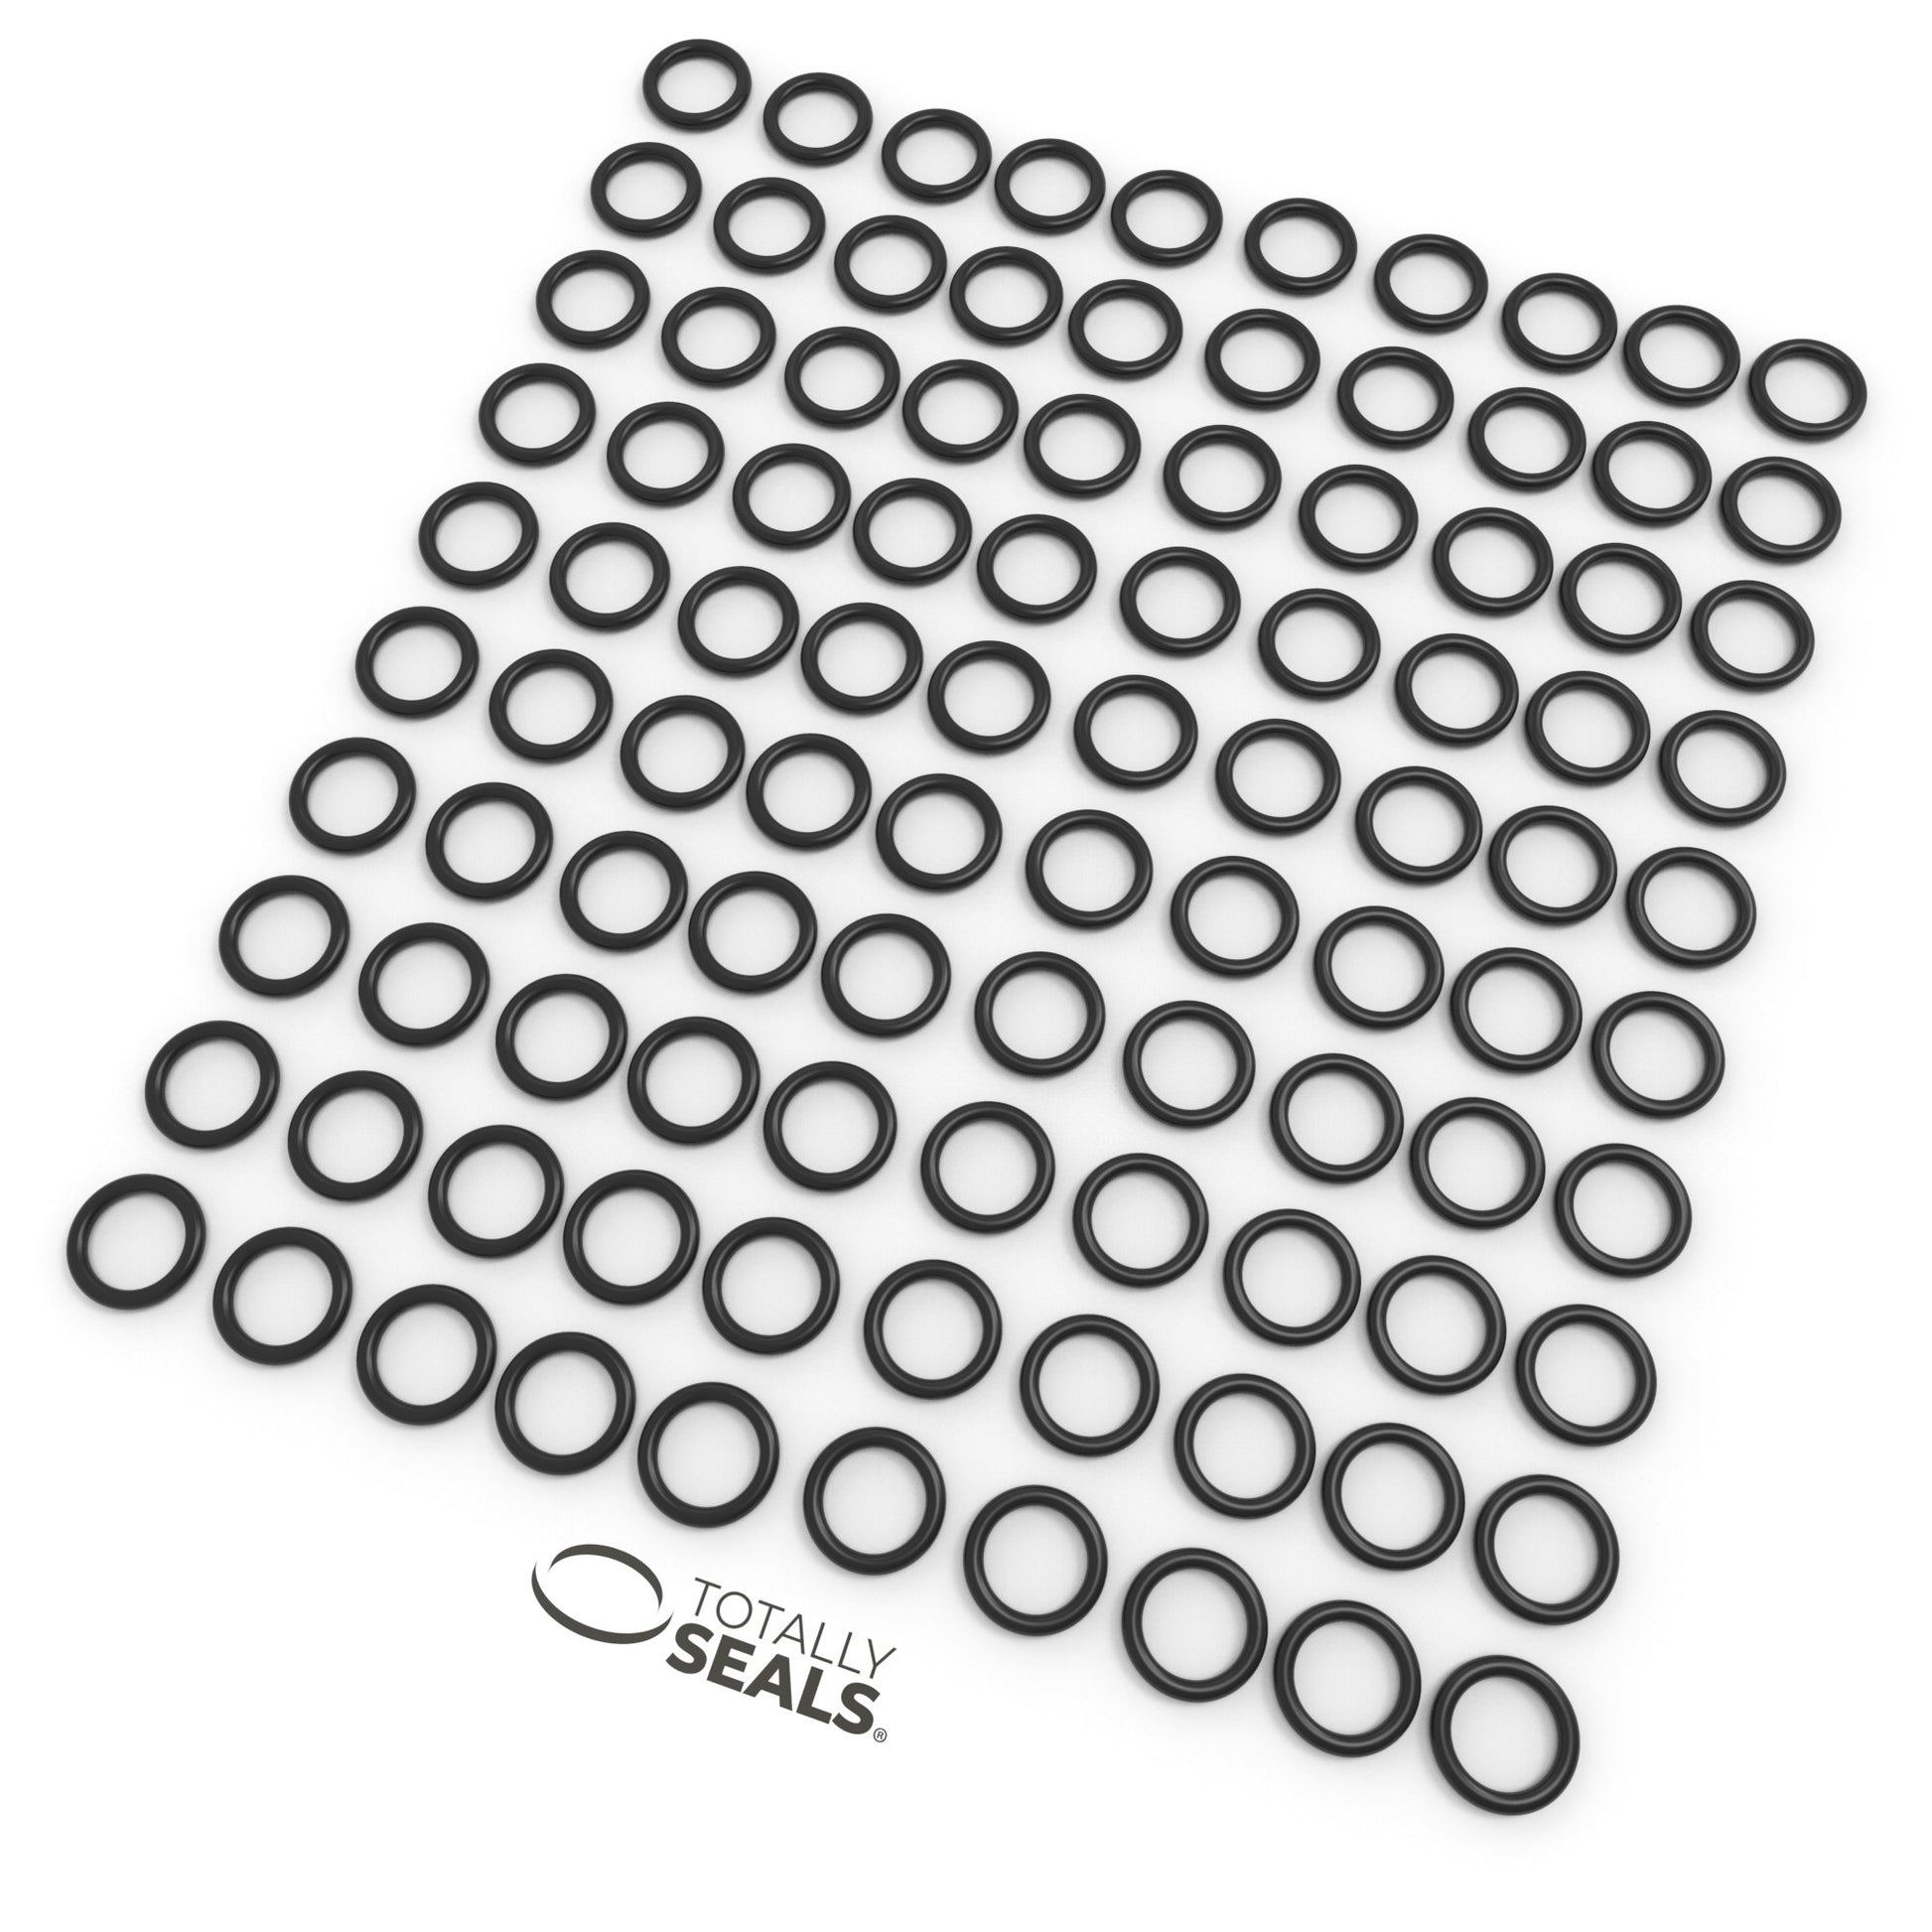 1/2" x 1/16" (BS014) Imperial Nitrile O-Rings - Totally Seals®